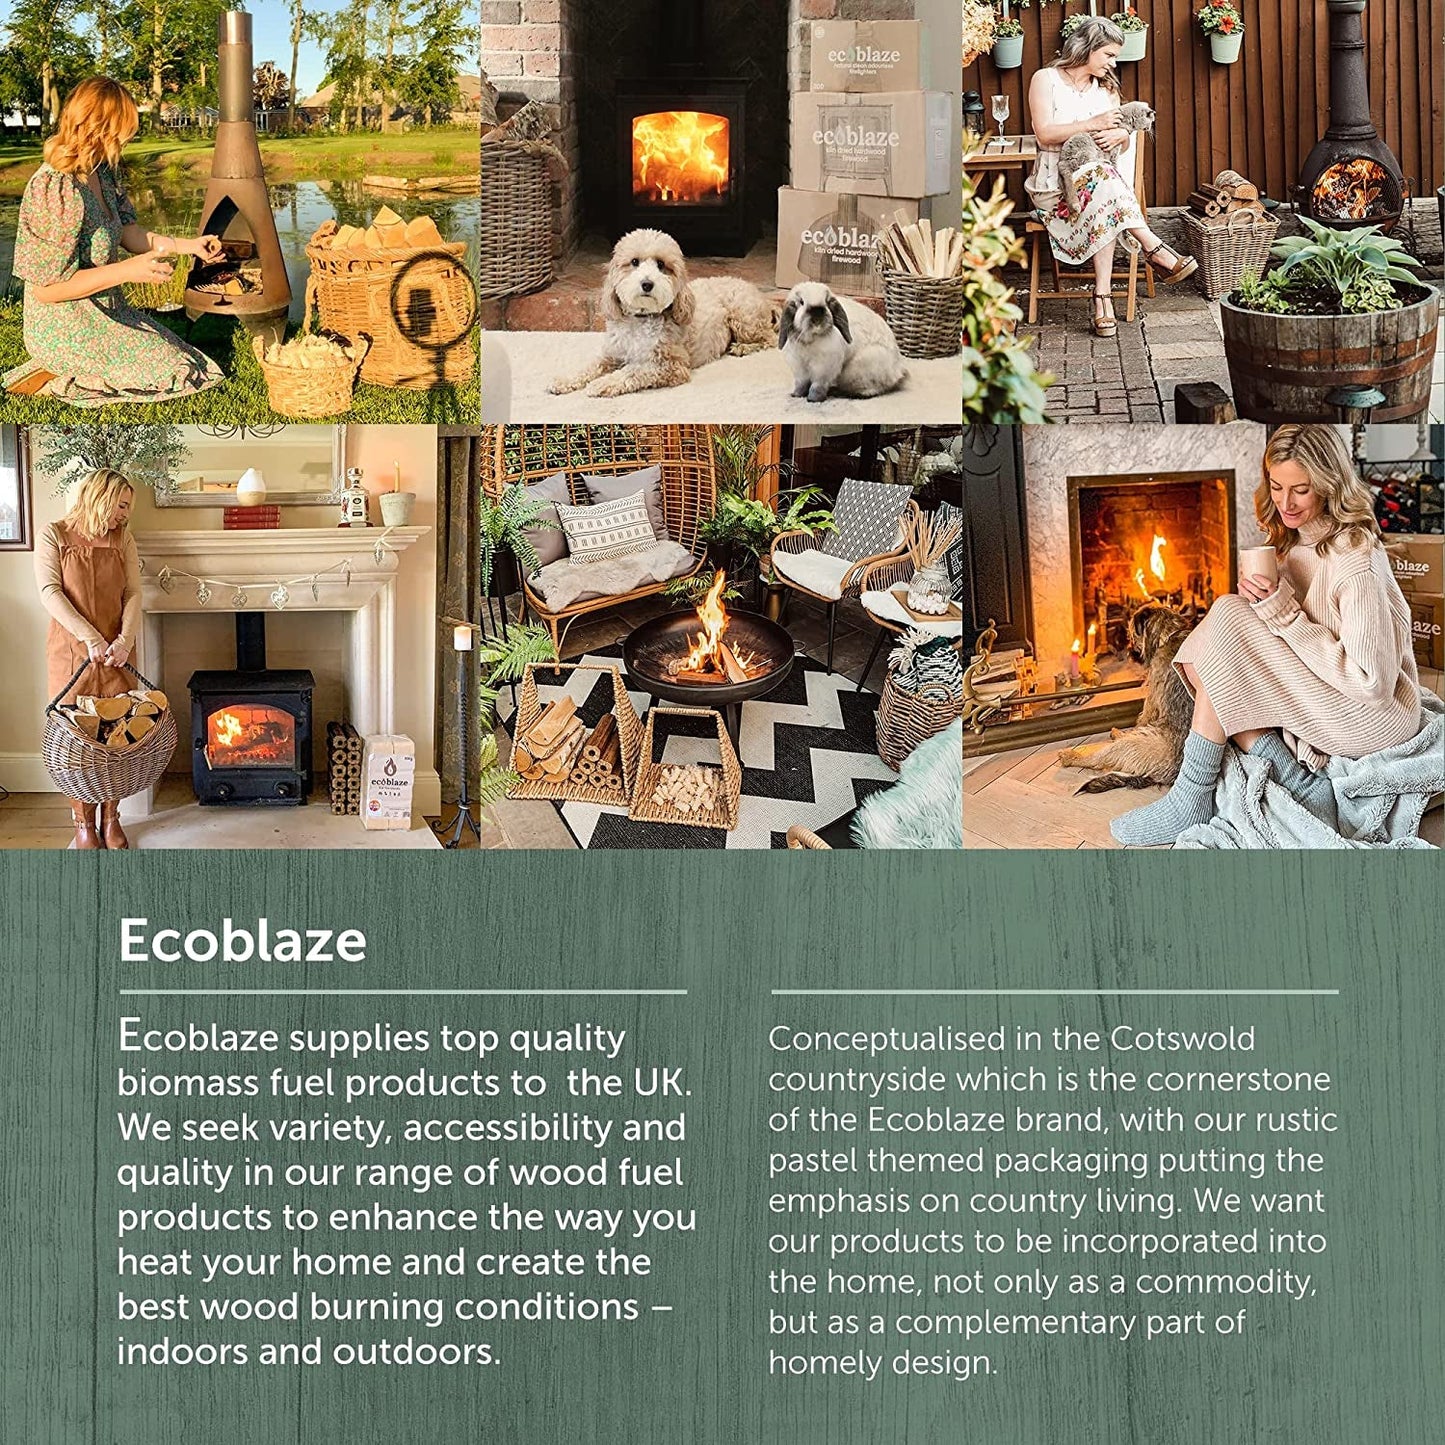 Ecoblaze Natural Firelighters, 200 Wood Wool Fire Lighters for Wood & Log Burners, BBQ & Pizza Oven Firestarters - Safe, Clean & Odourless Wax Coated Instant Spruce Fire Starters - 200 Box - FoxMart™️ - FoxMart™️